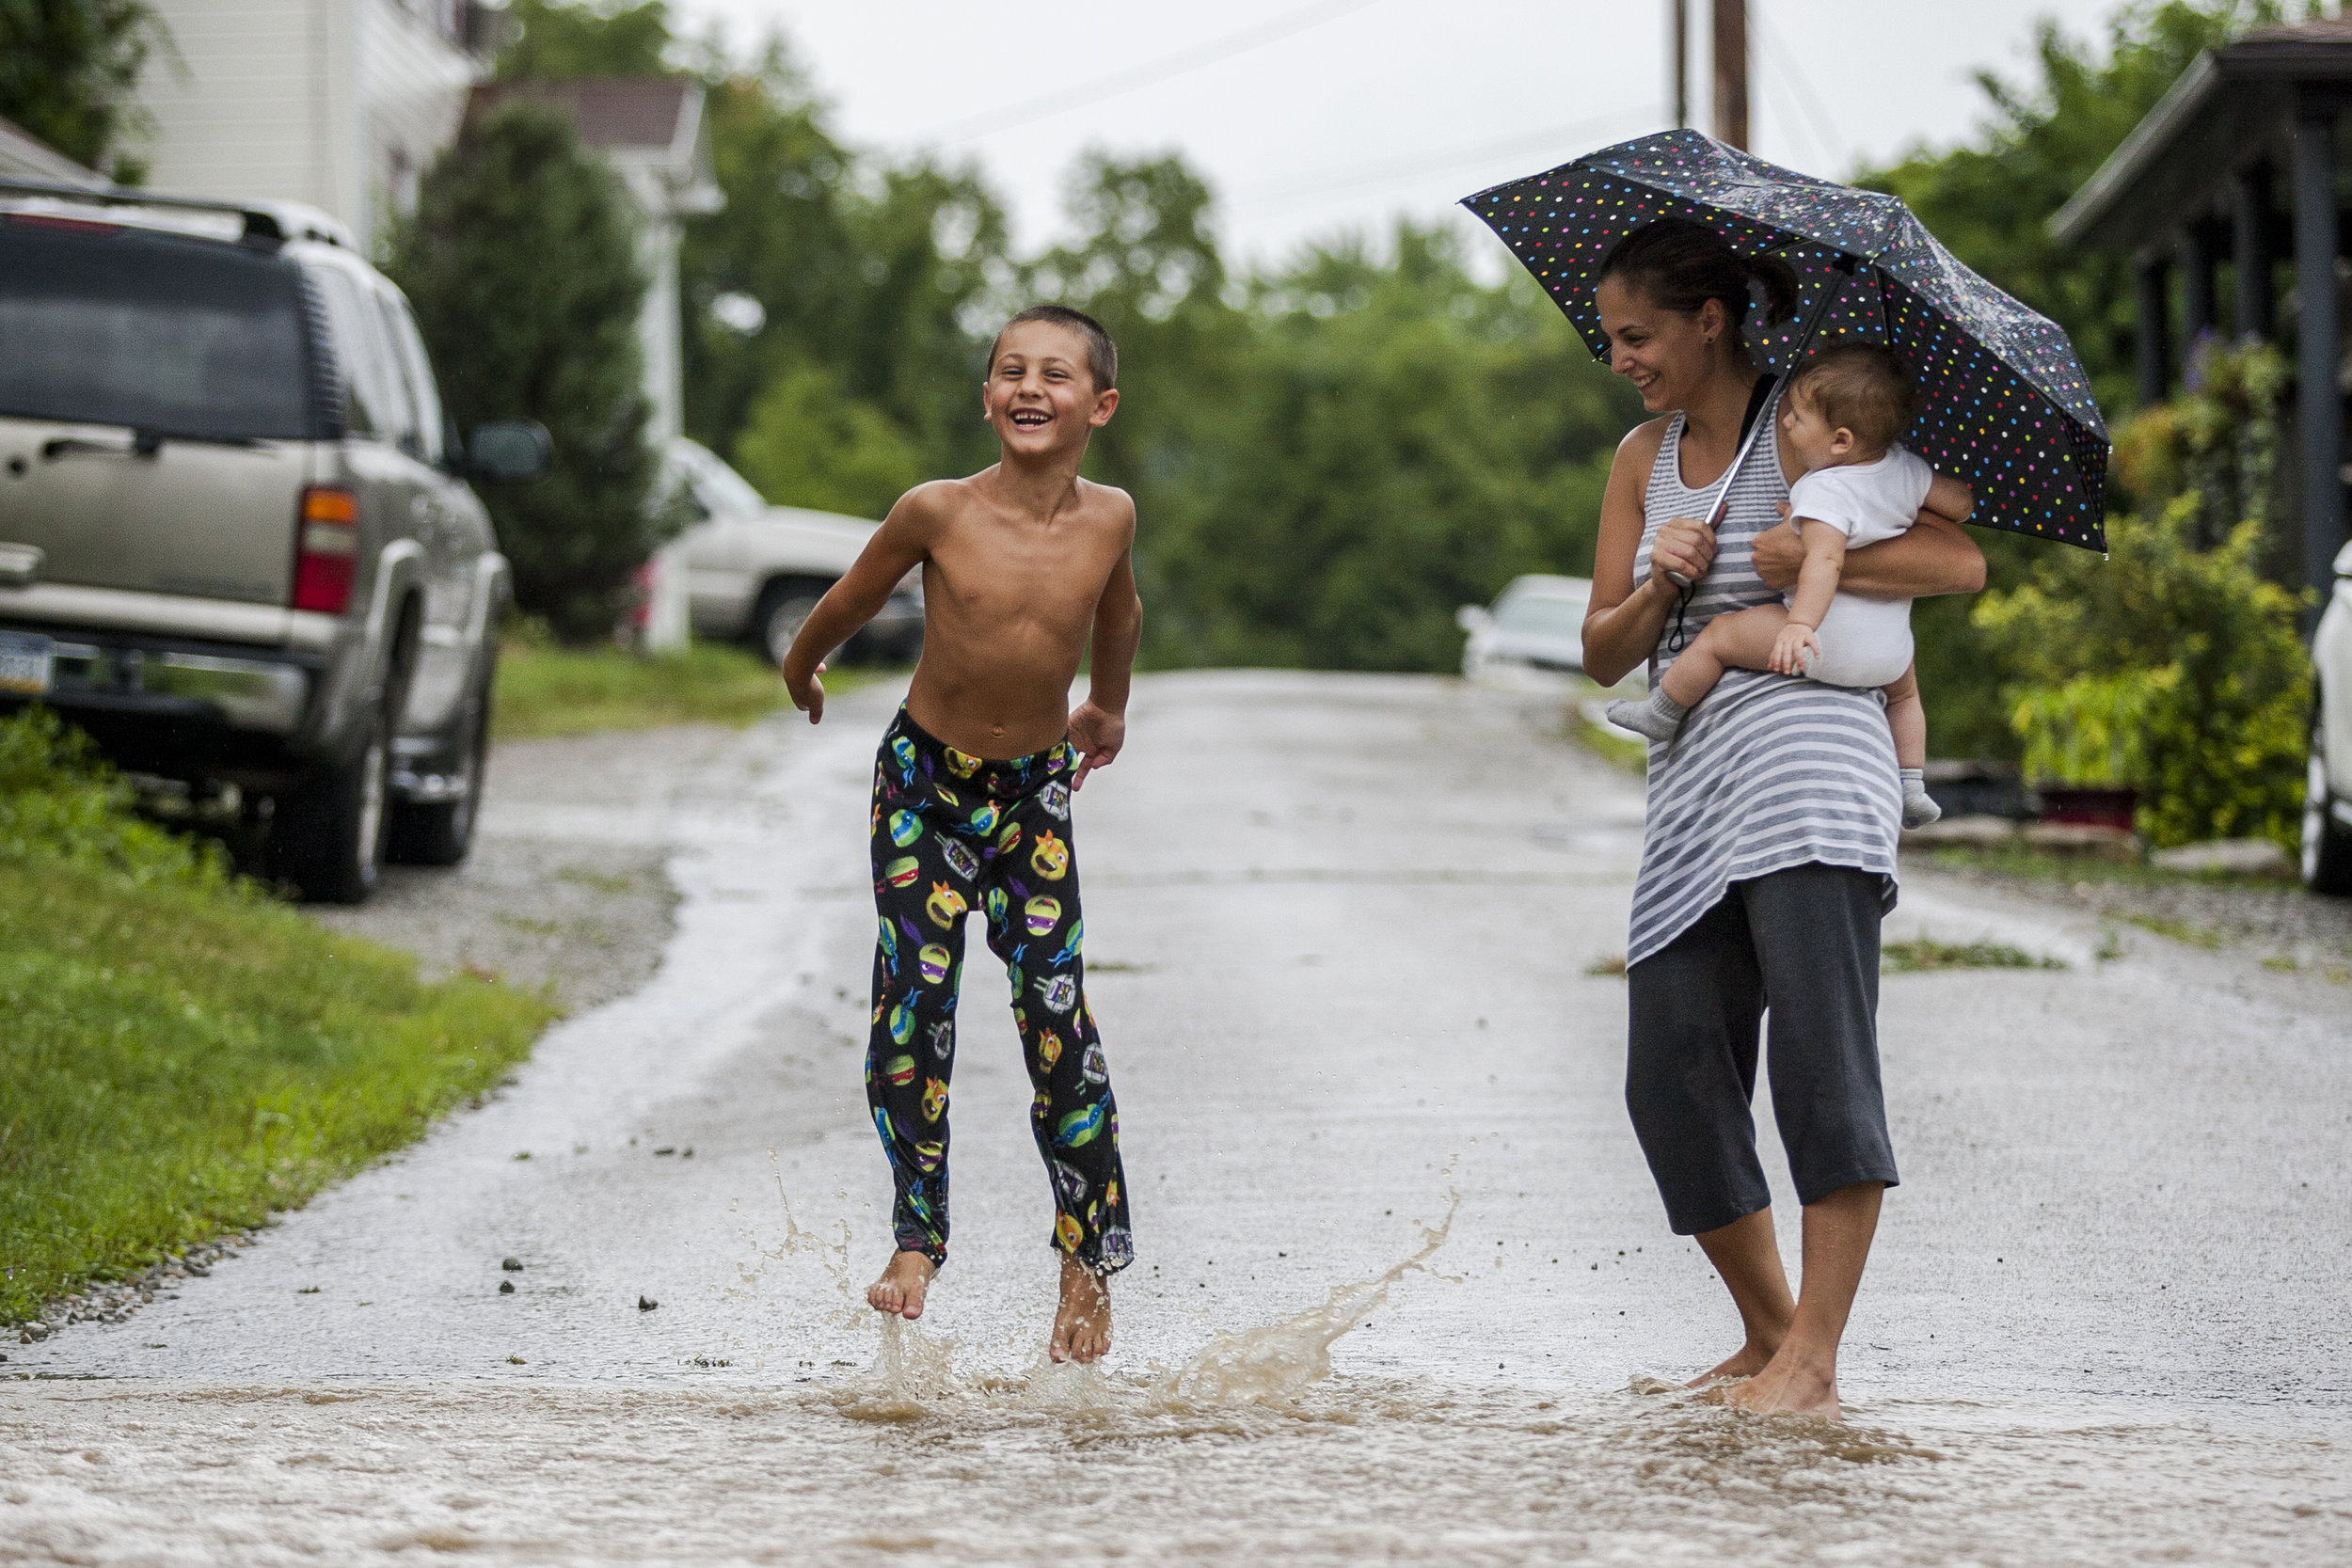  Robert Repovz, 6, splashes through rain water running across First Street while his mother Anita and baby sister Gabriella watch in New Stanton, Pennsylvania, on Saturday, July 30, 2016. 